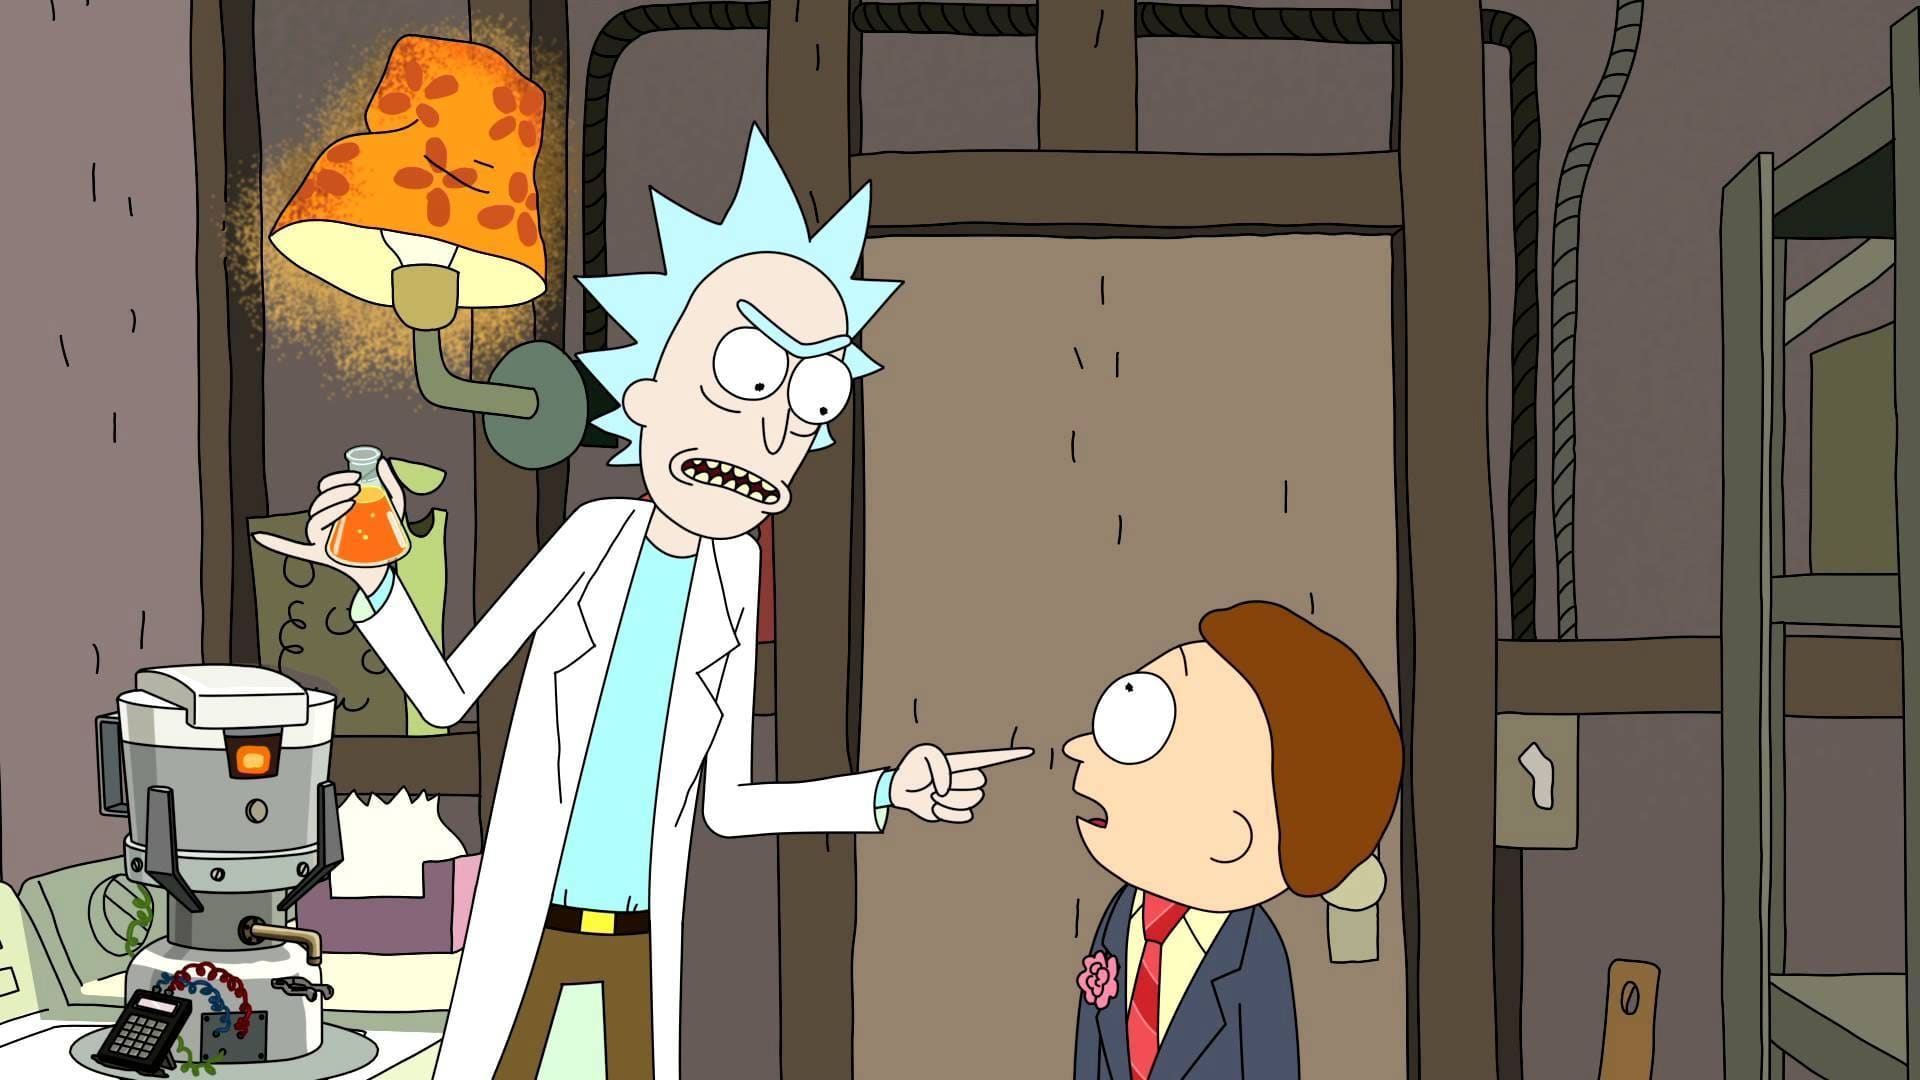 How to Watch 'Rick and Morty' Season 6, Episode 1